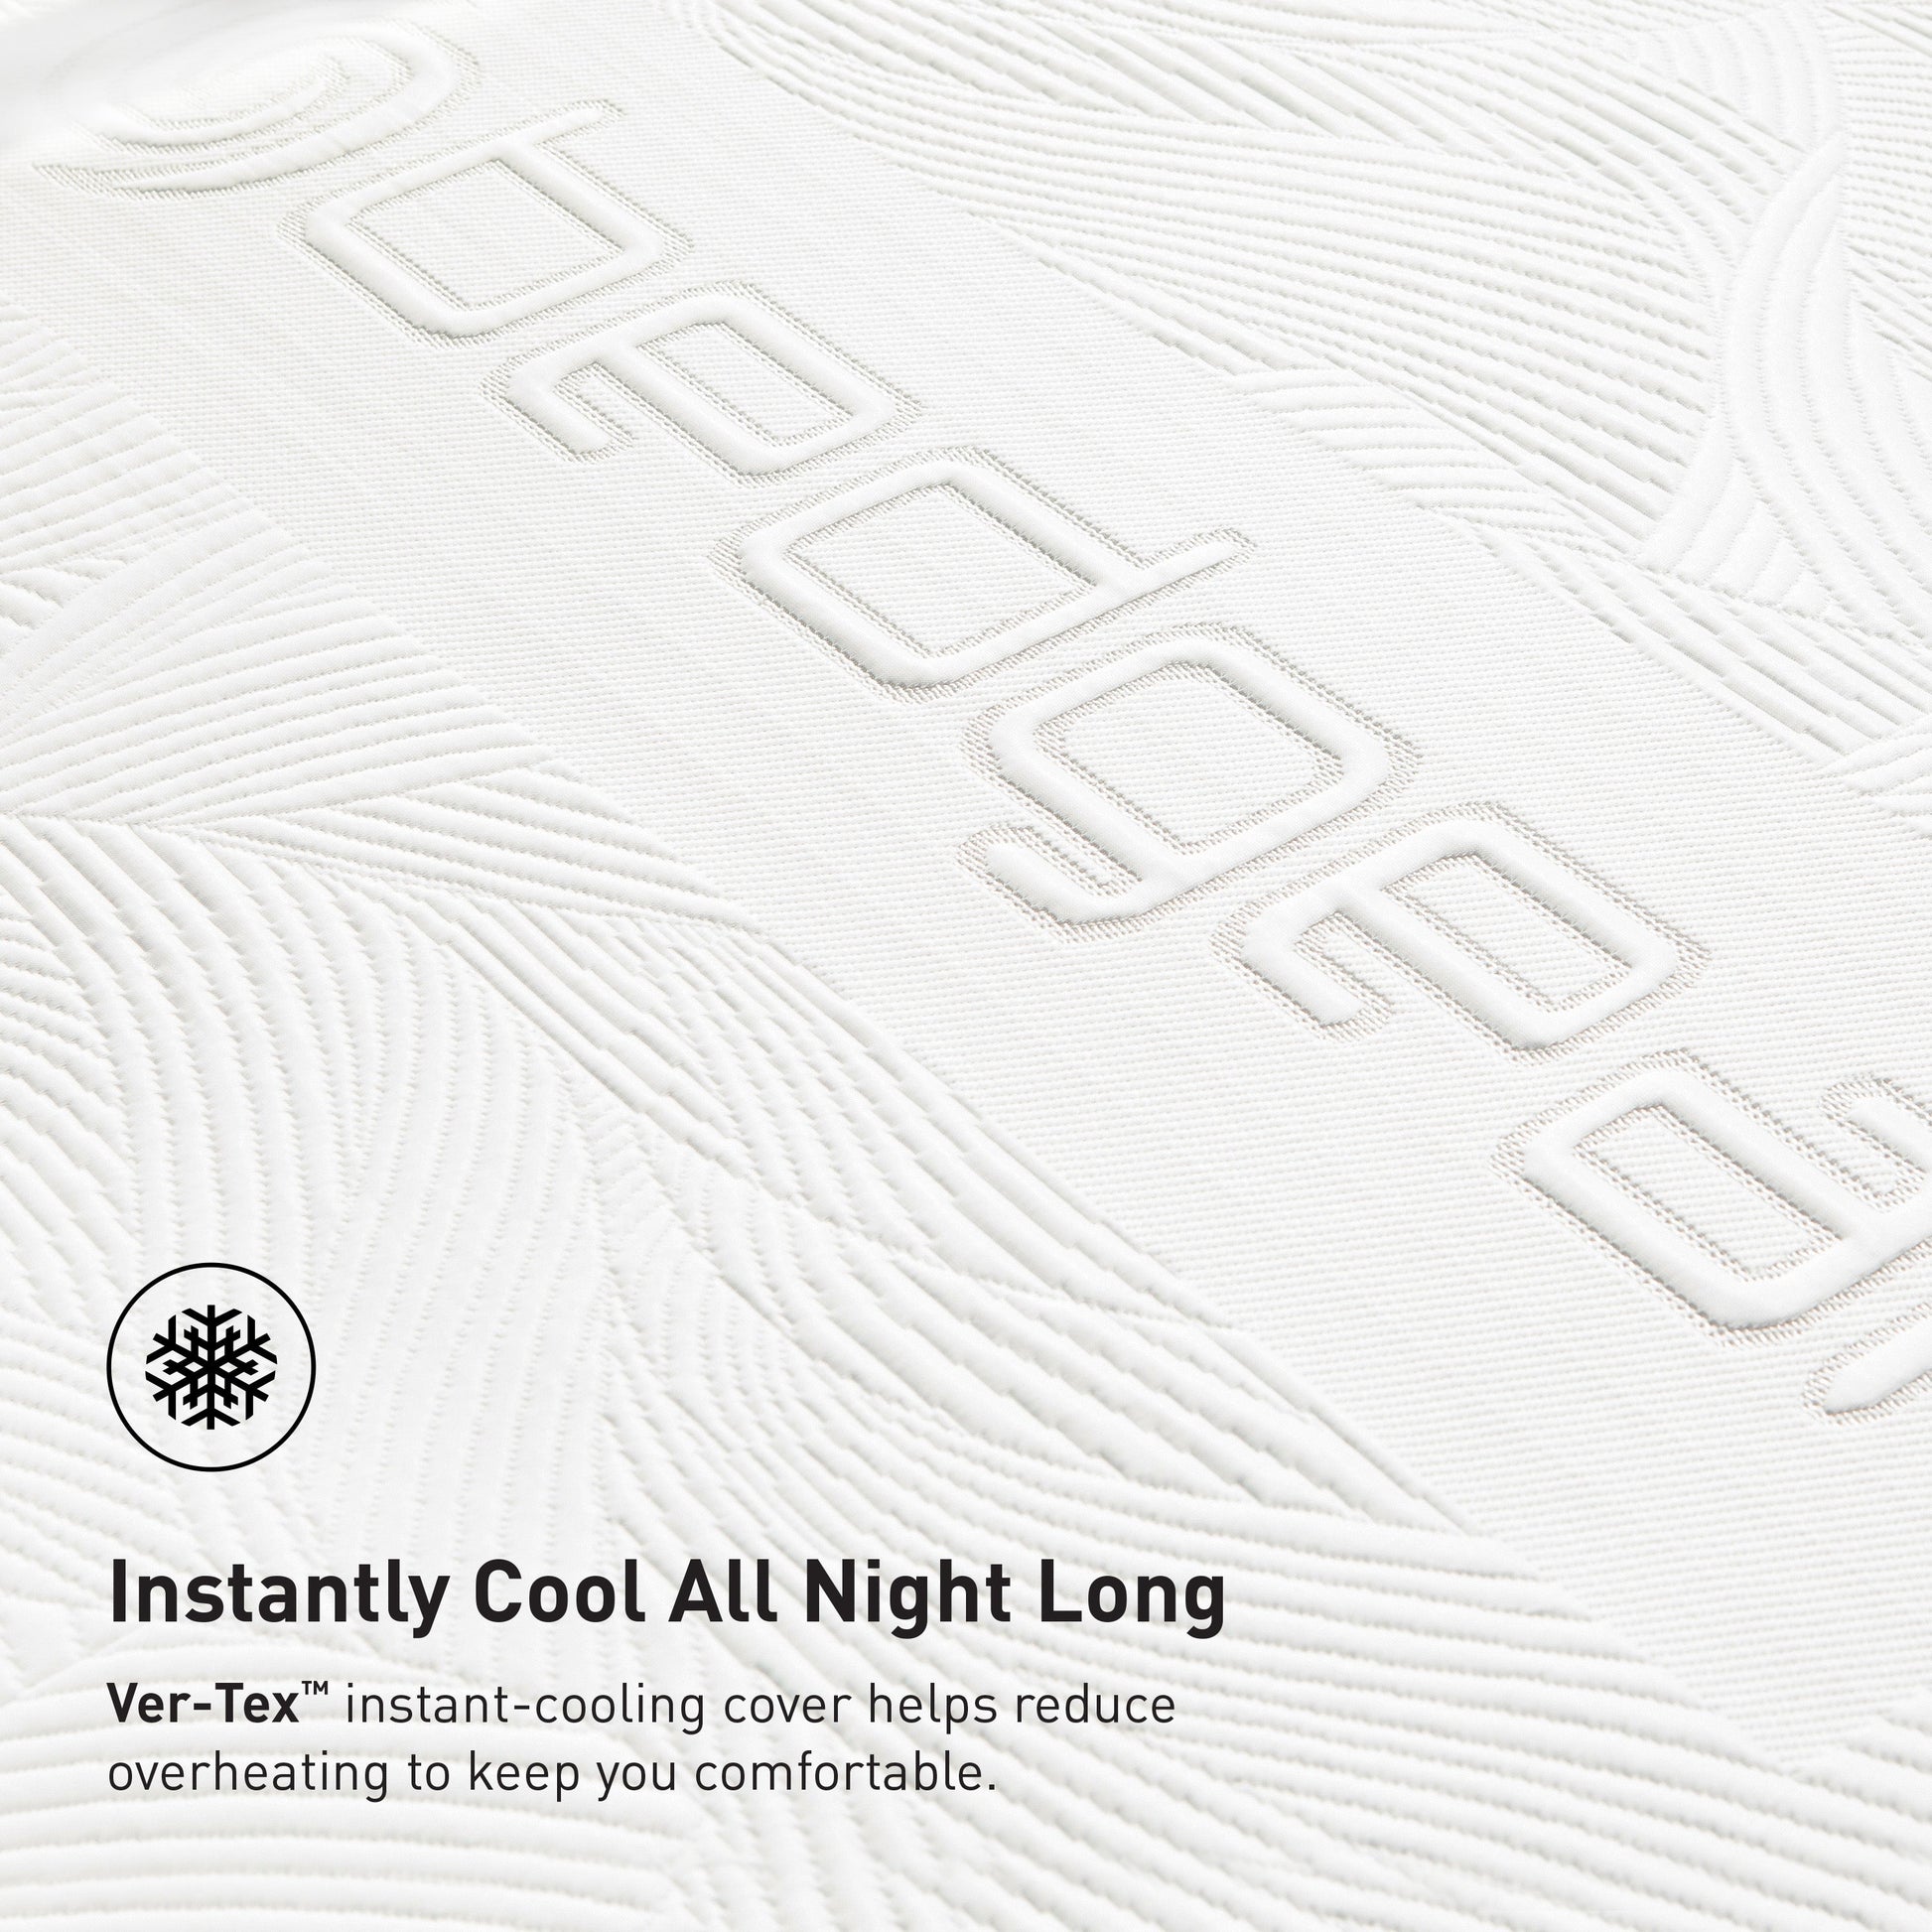 Bedgear S5 II Performance Mattress Instantly Cool All Night Long